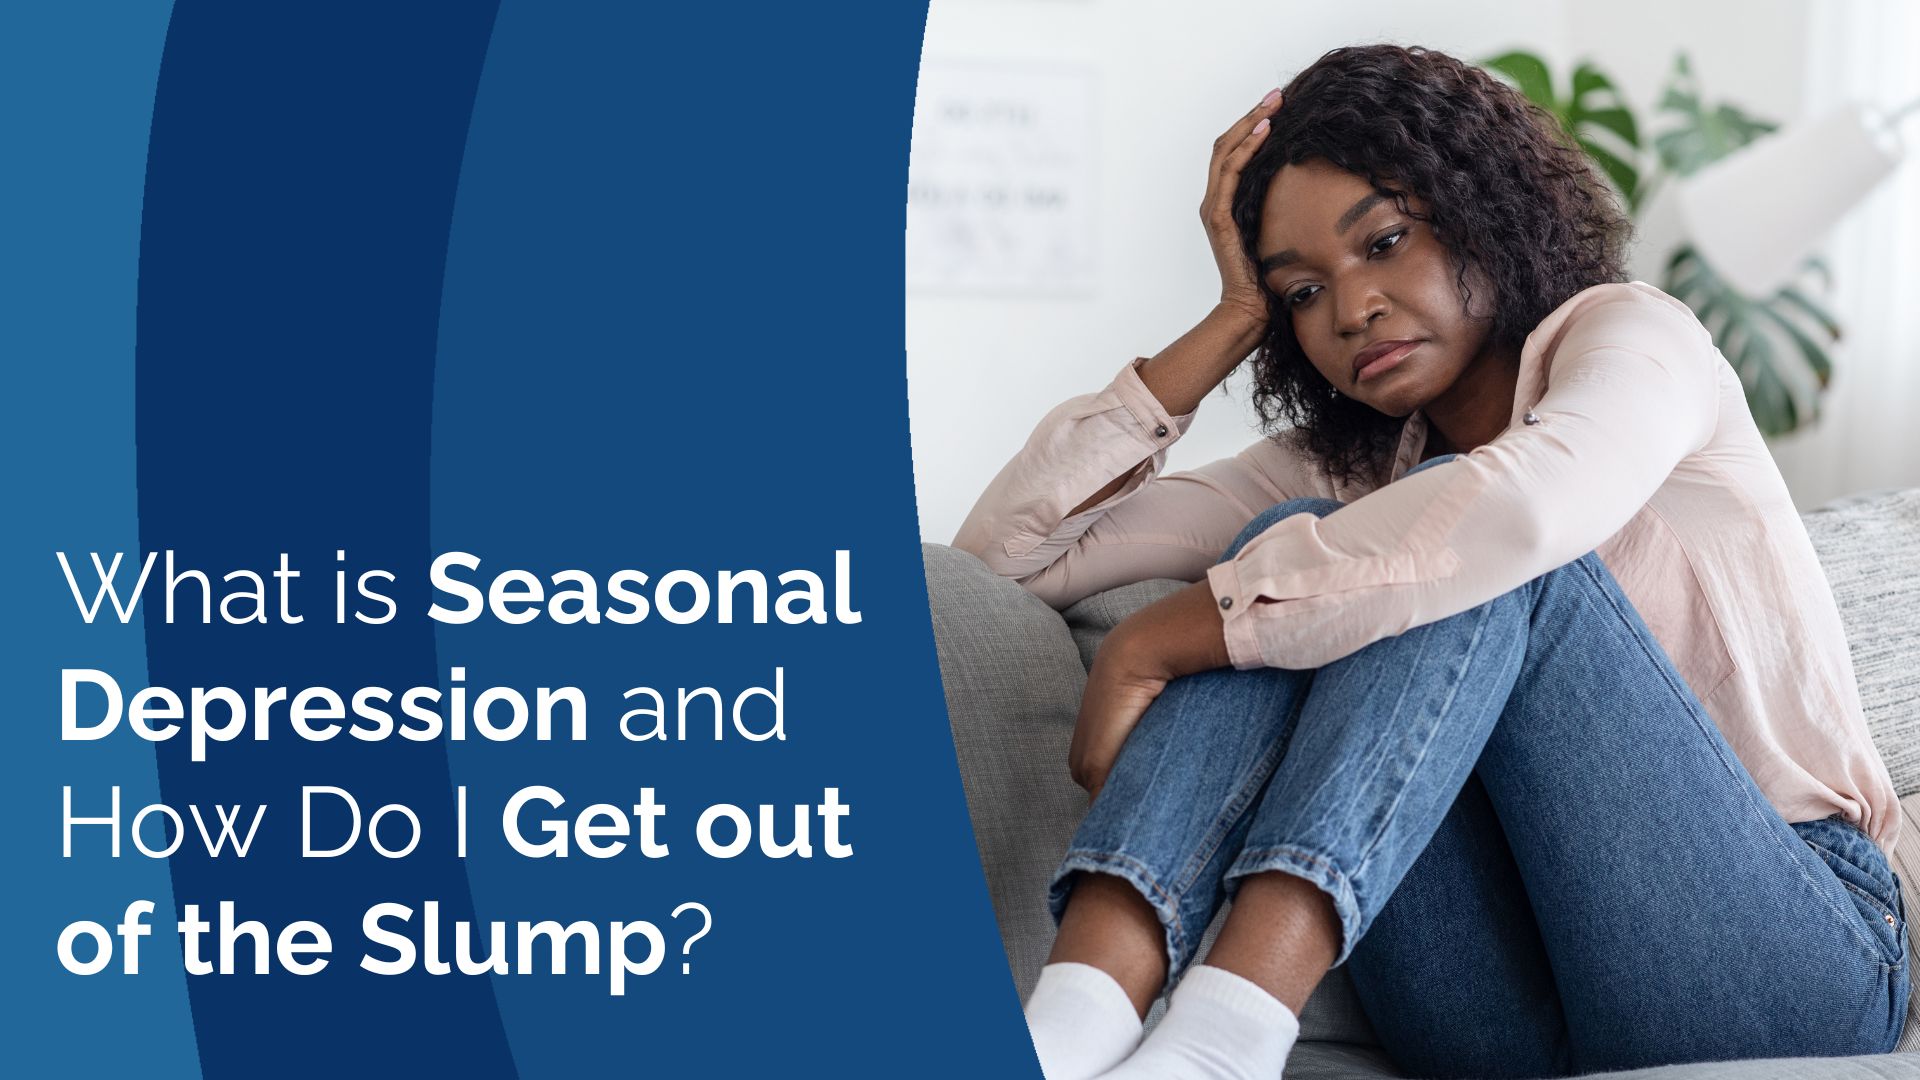 What is Seasonal Depression and How Do I Get out of the Slump?